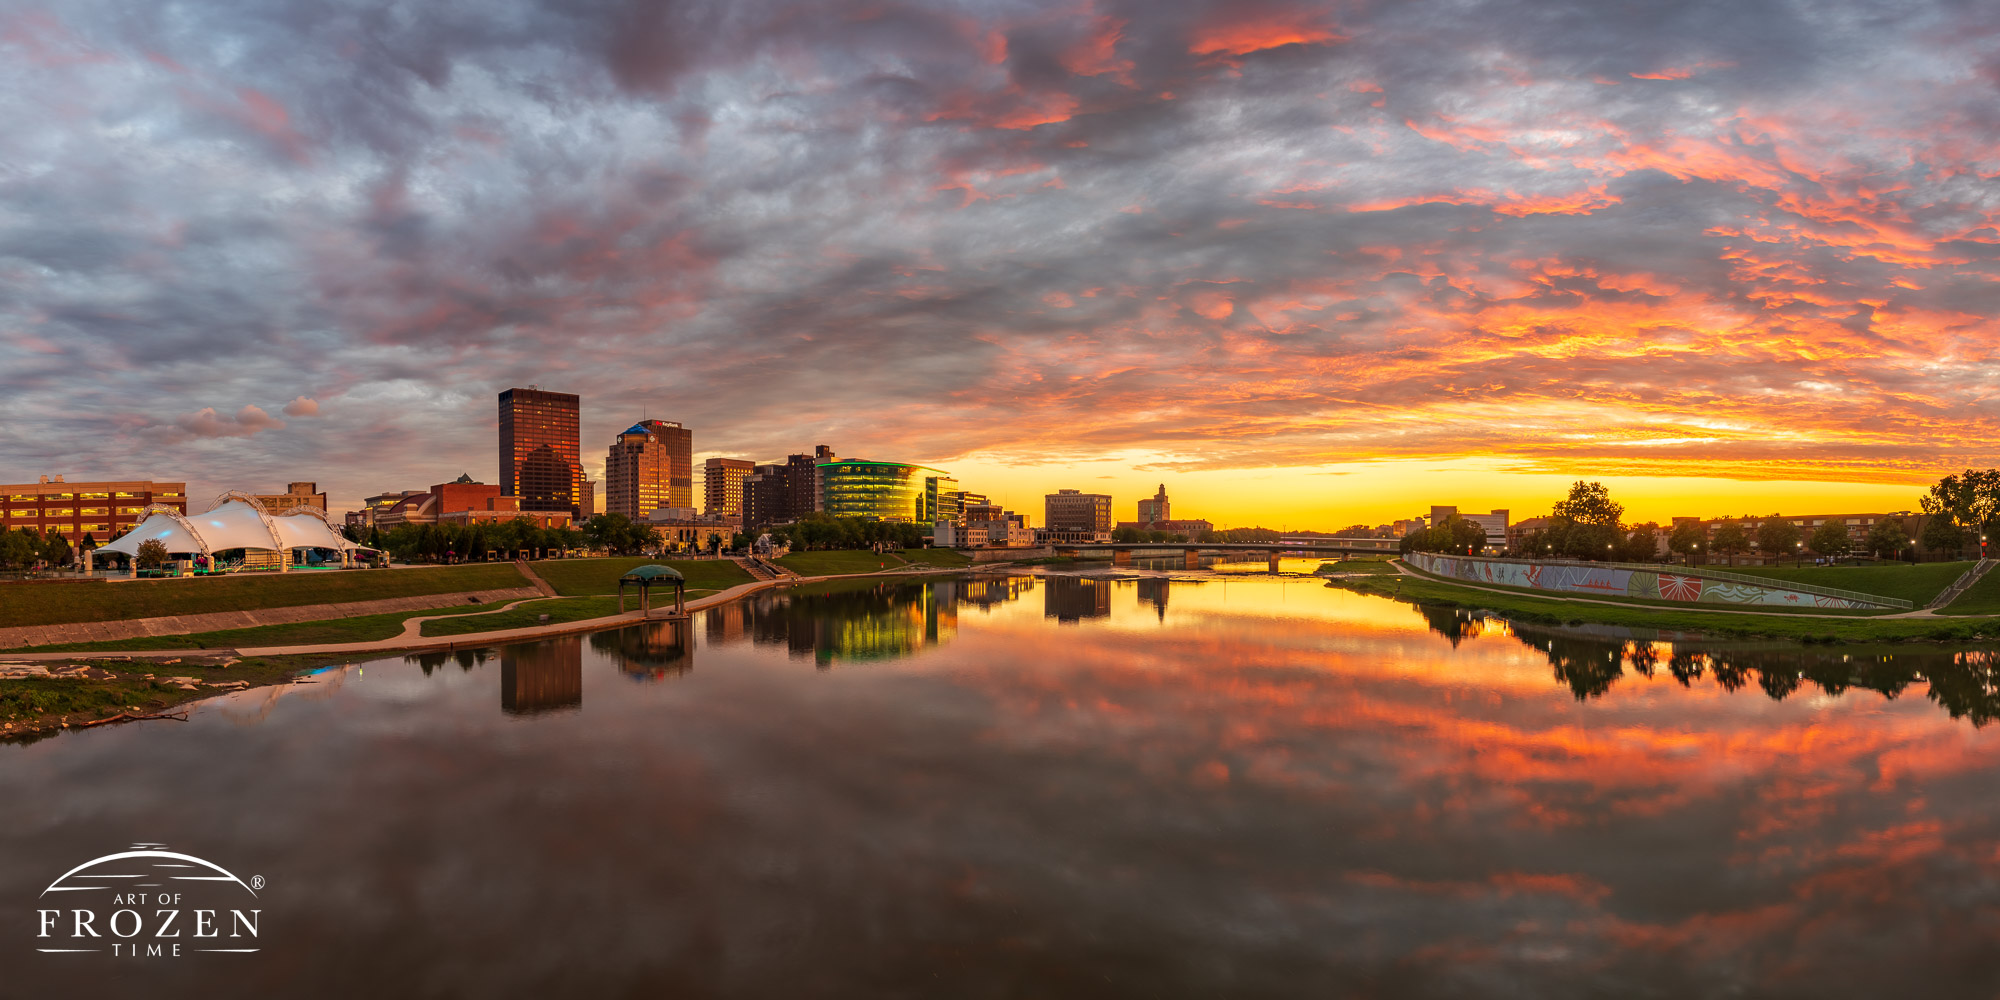 Dayton Skyline panorama at sunset as the Miami River reflects the colorful and fiery clouds over the Miami Valley